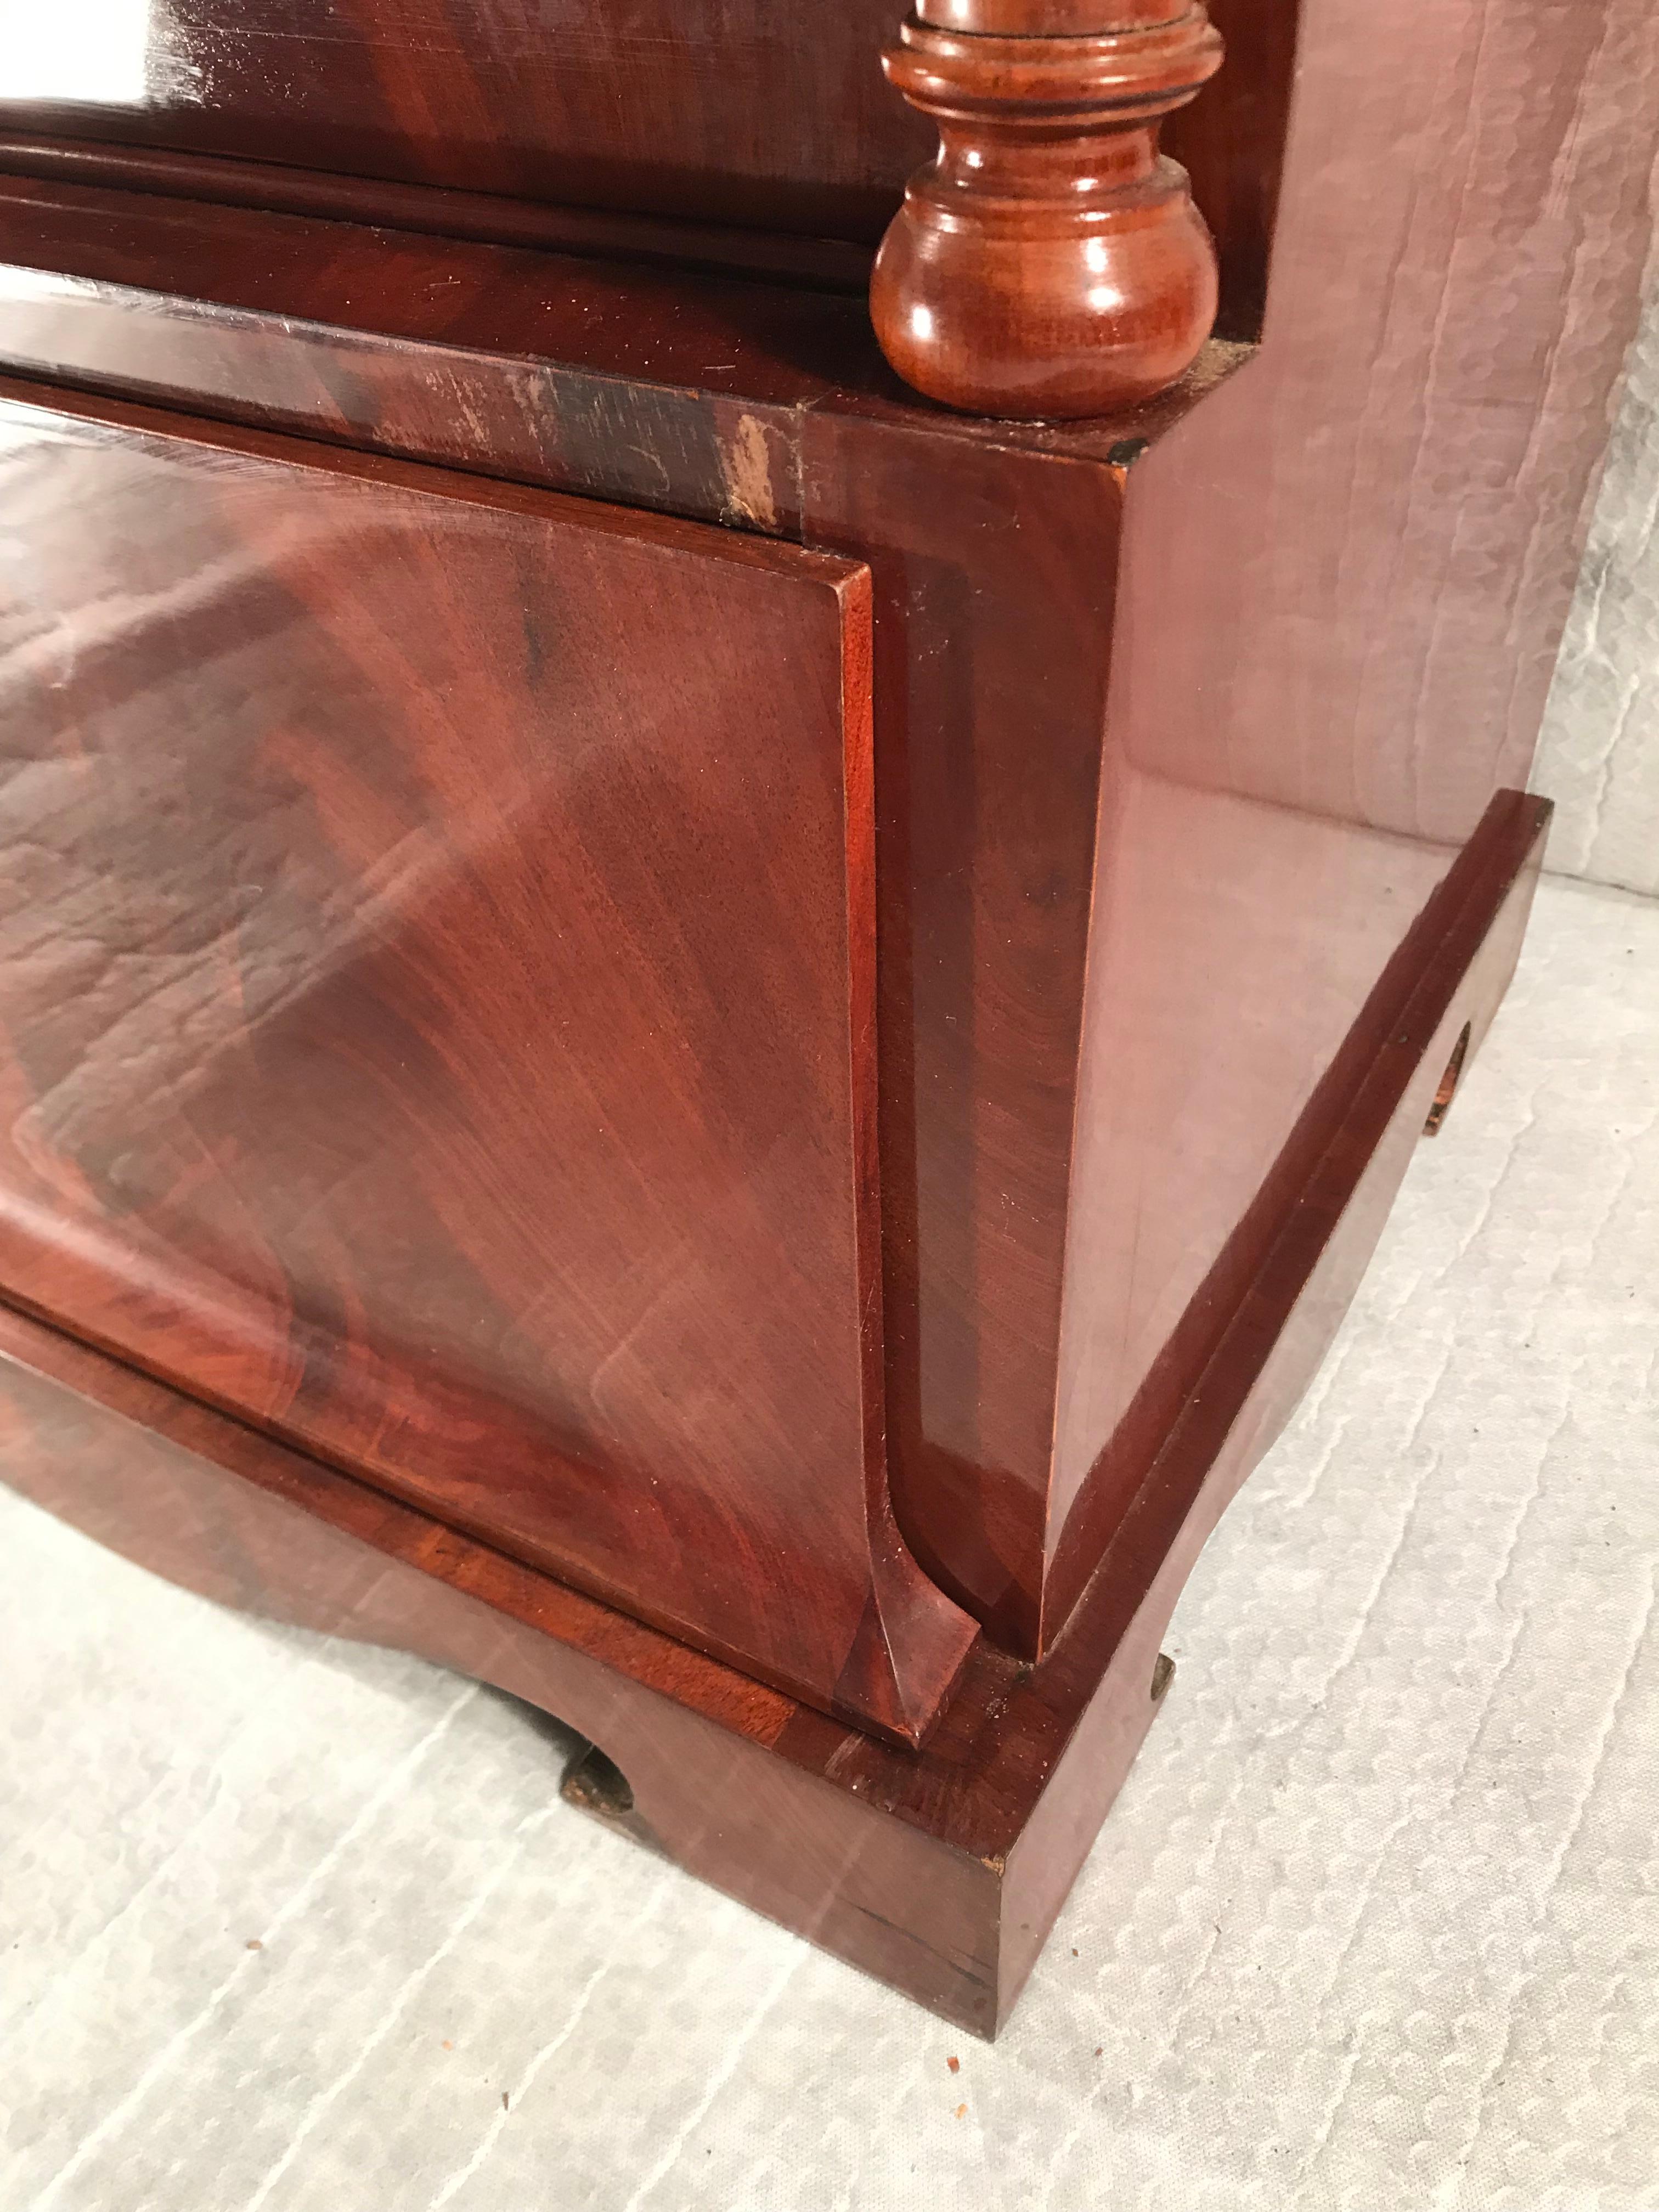 Biedermeier commode, Northern Germany/Denmark, 1820, mahogany veneer. Exquisite small commode with beautiful veneer grain. The commode will be shipped from Germany, shipping costs to Boston are included.